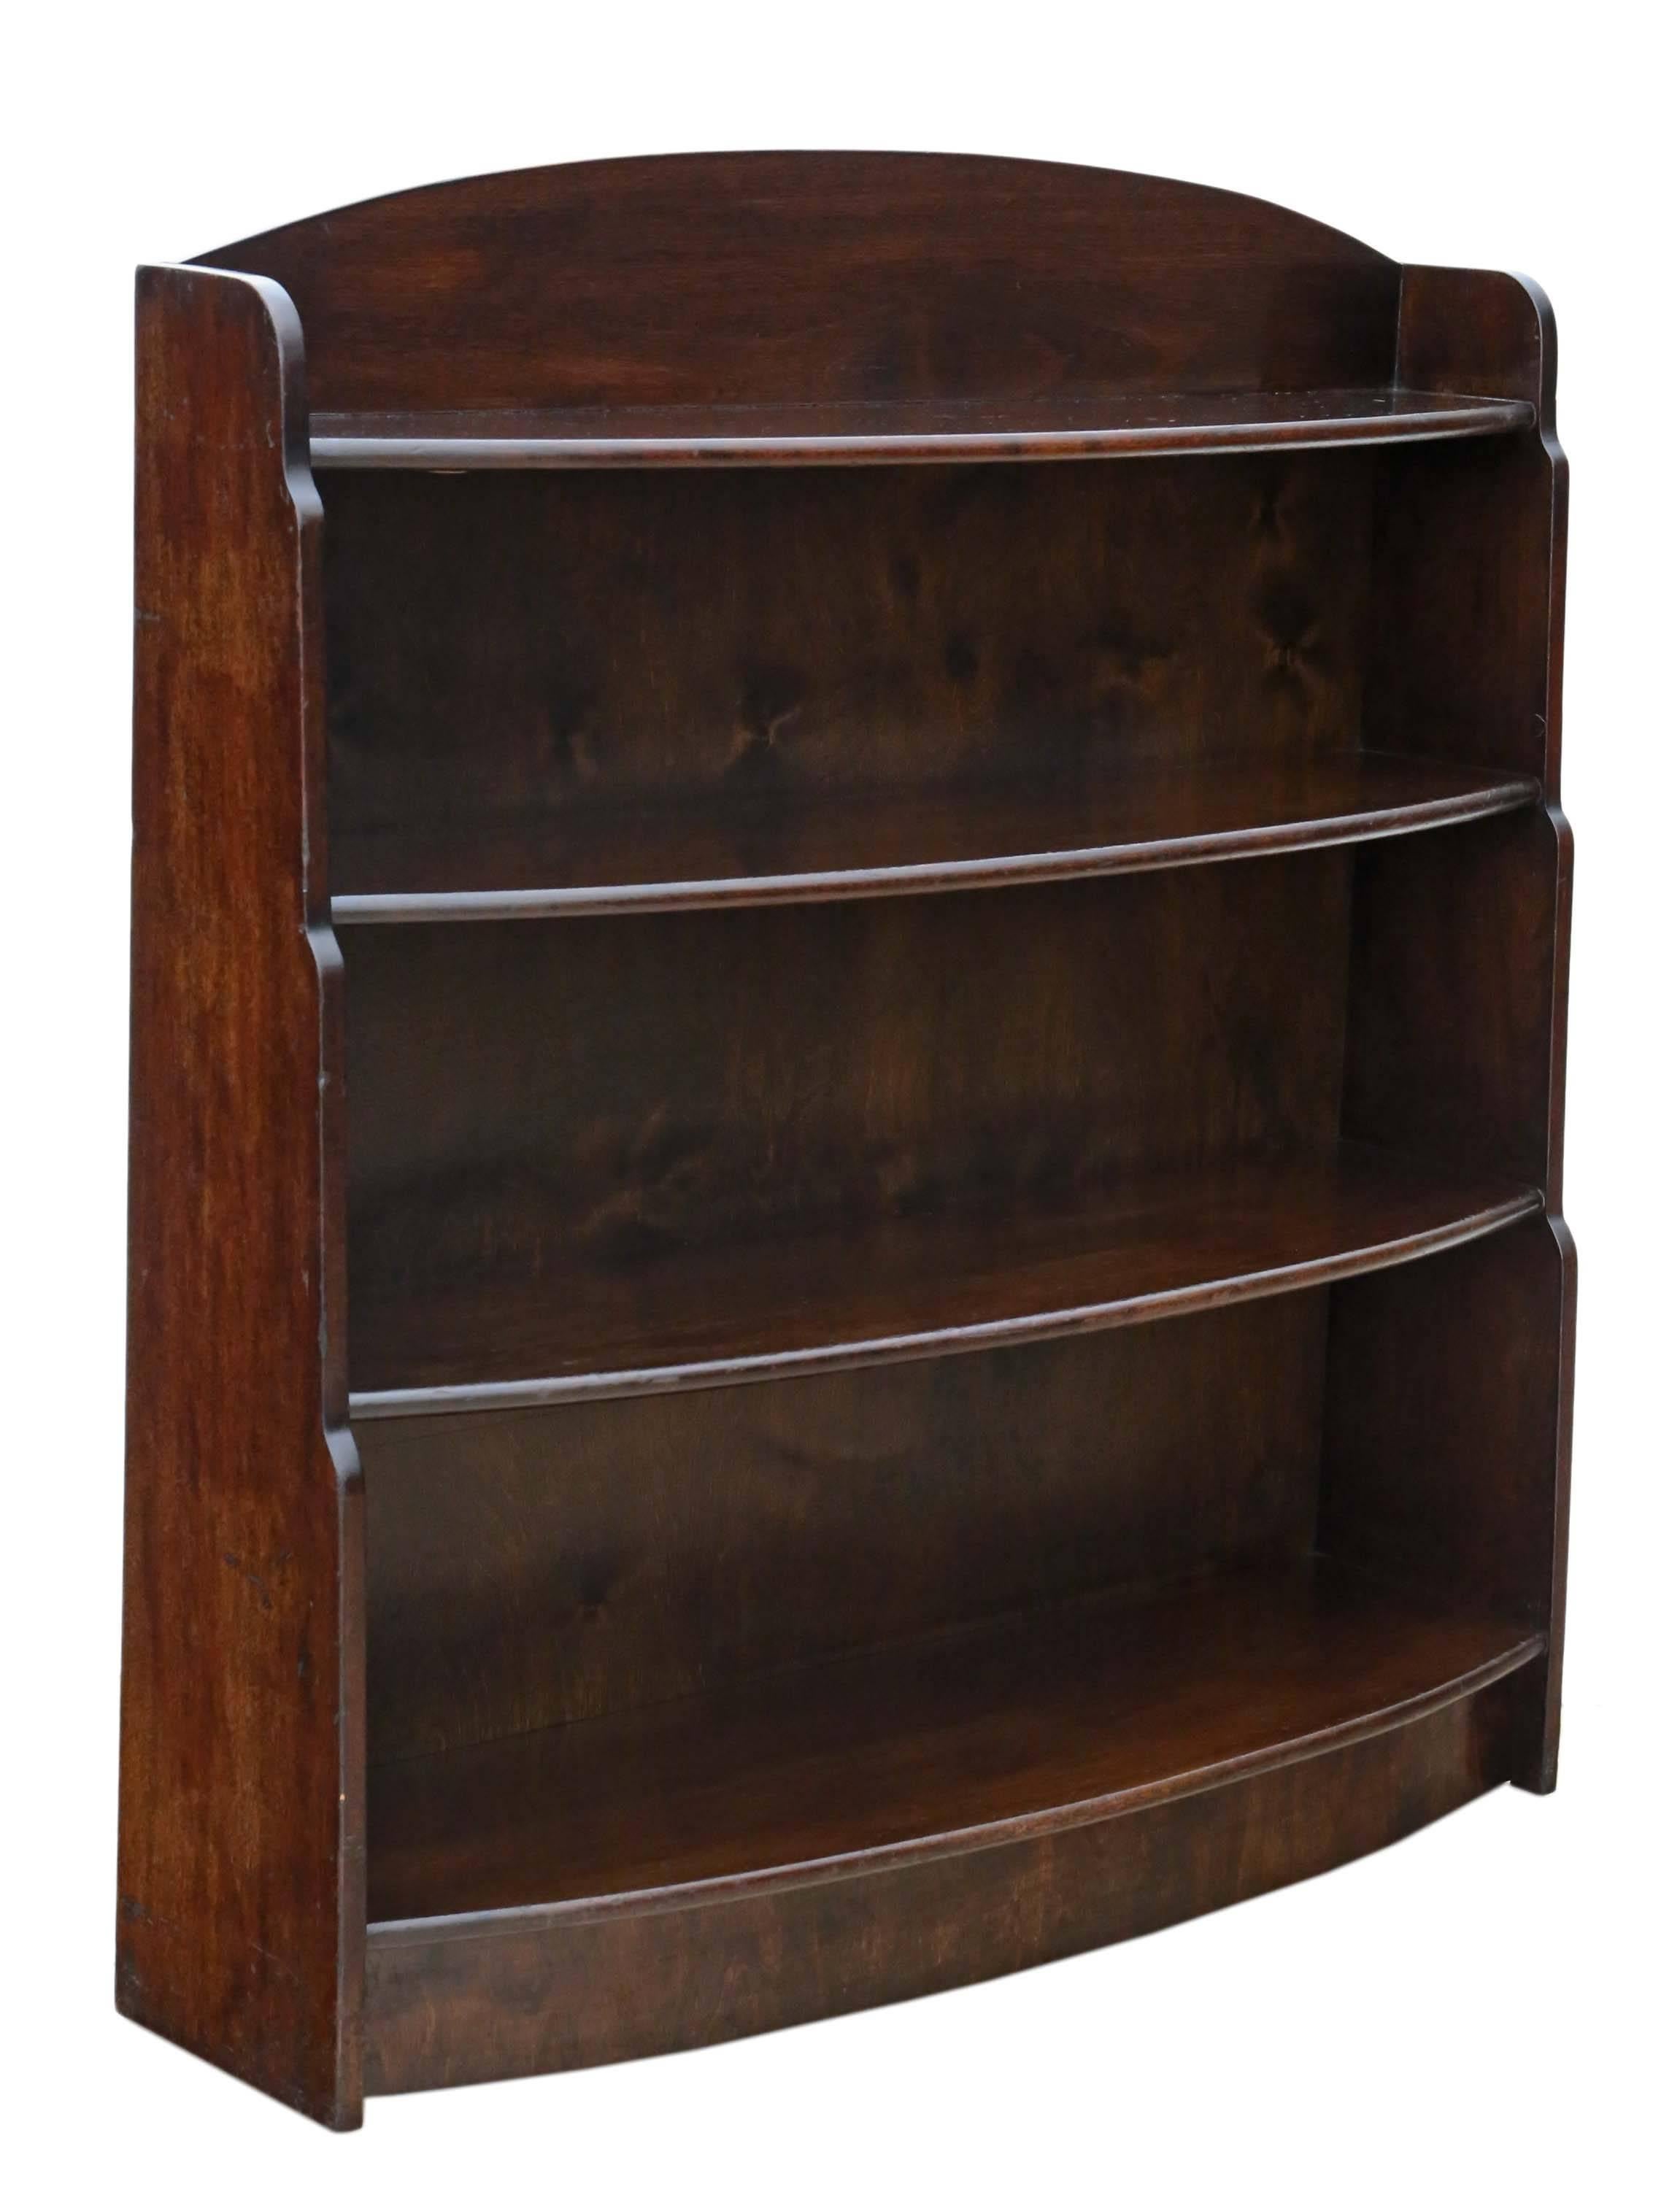 Antique Retro Mahogany Open Waterfall Bookcase Remploy In Good Condition For Sale In Wisbech, Walton Wisbech